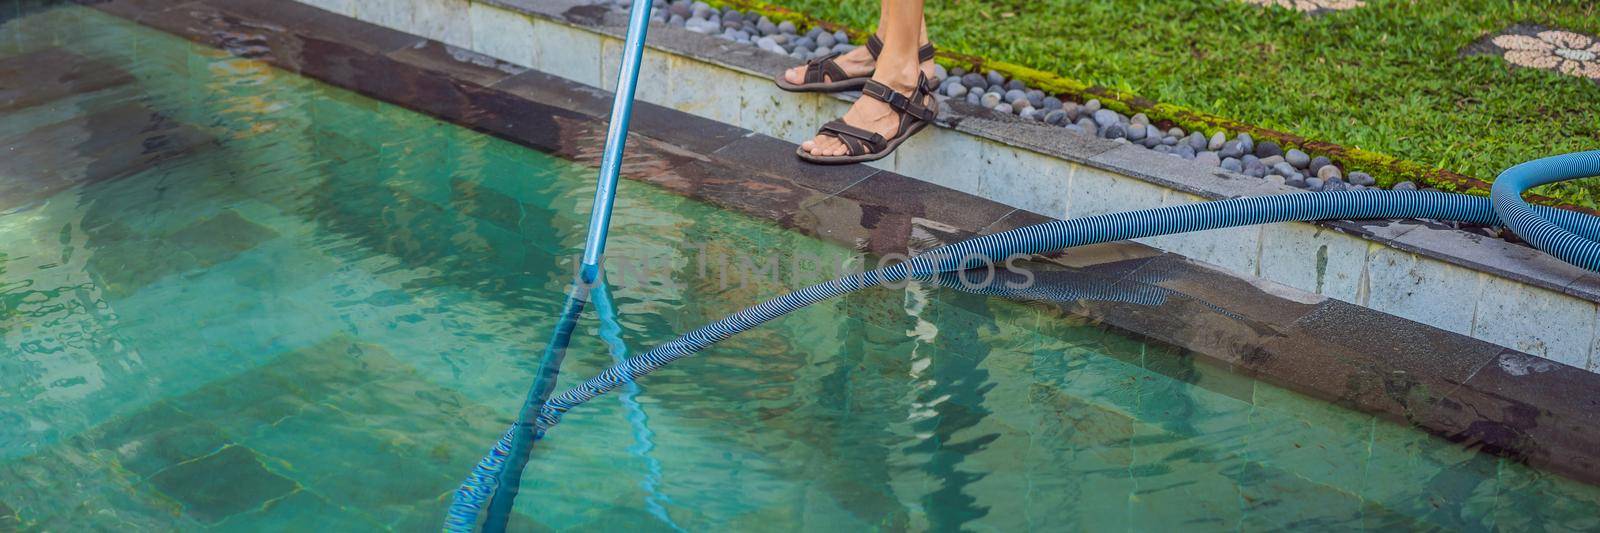 Cleaner of the swimming pool . Man in a blue shirt with cleaning equipment for swimming pools. Pool cleaning services. BANNER, LONG FORMAT